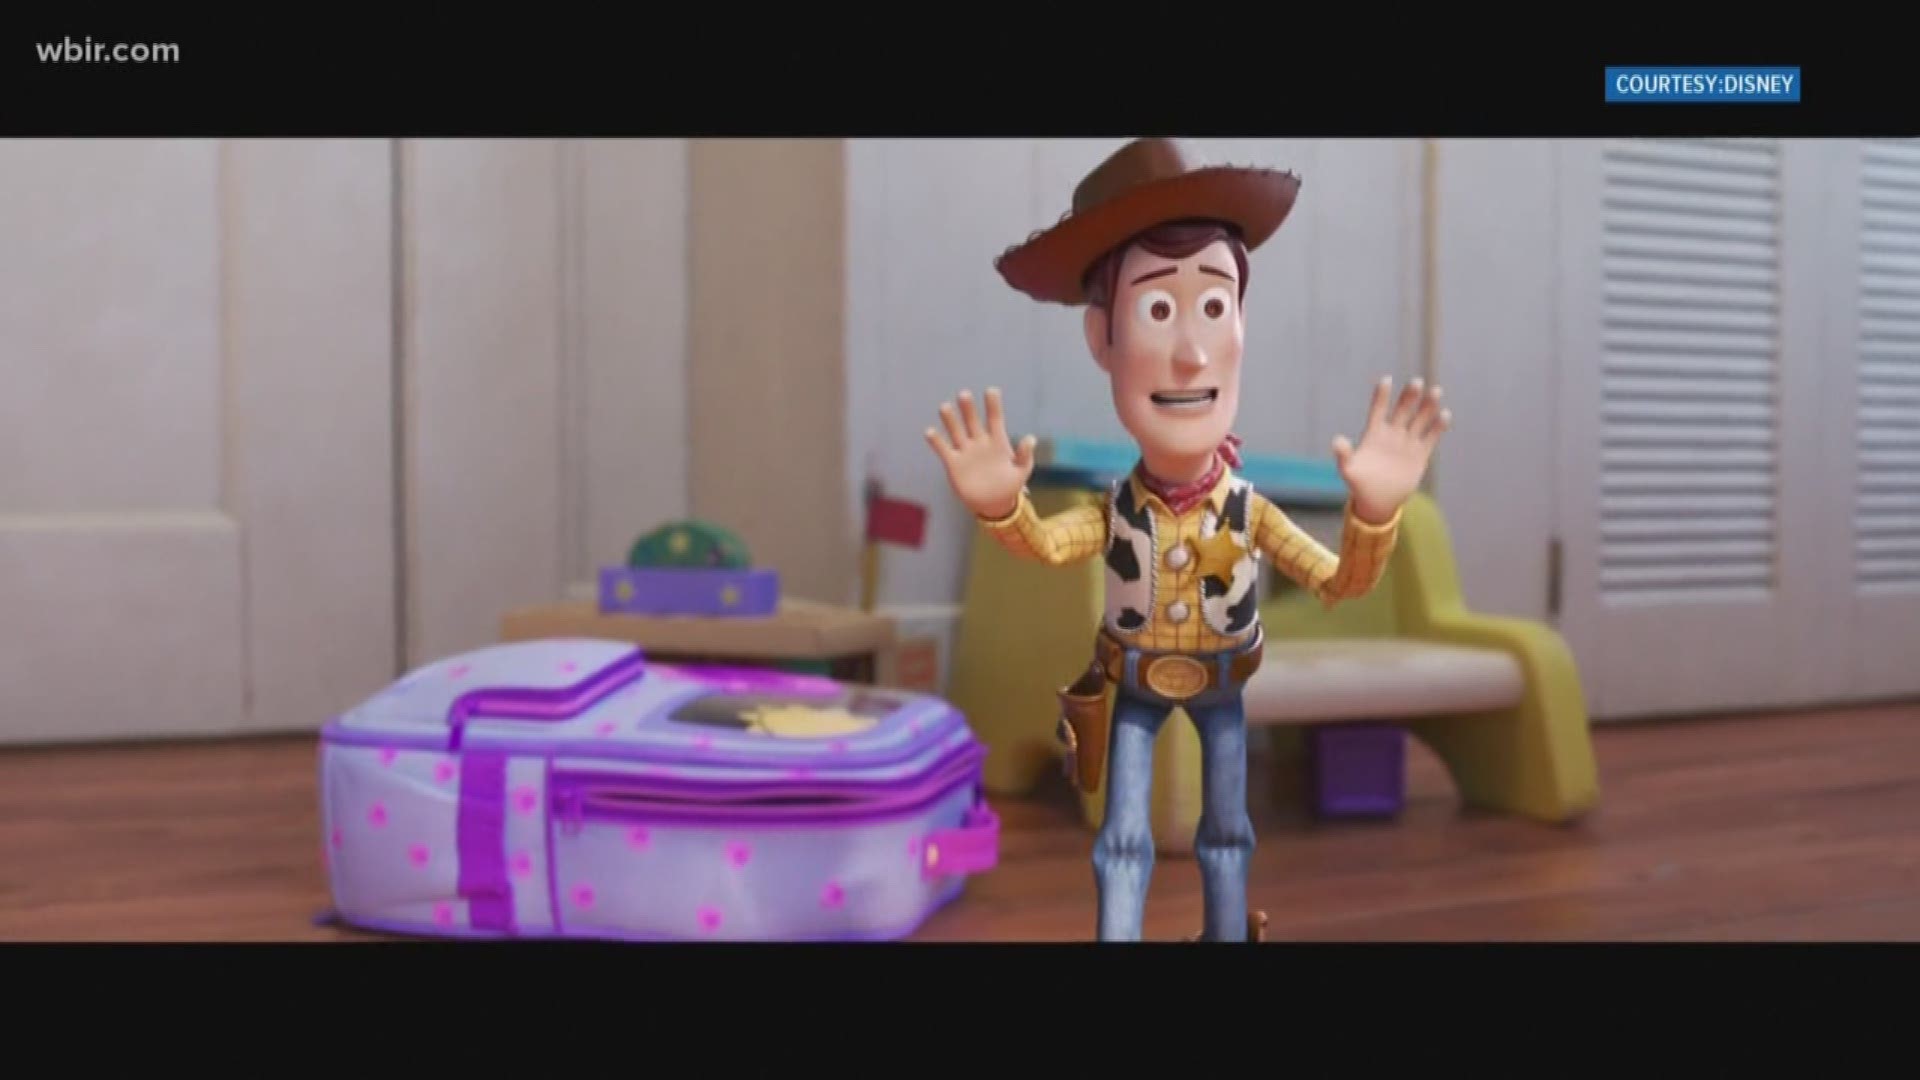 Movie critic, Josh West reviews what's big at the box office - including Toy Story 4.